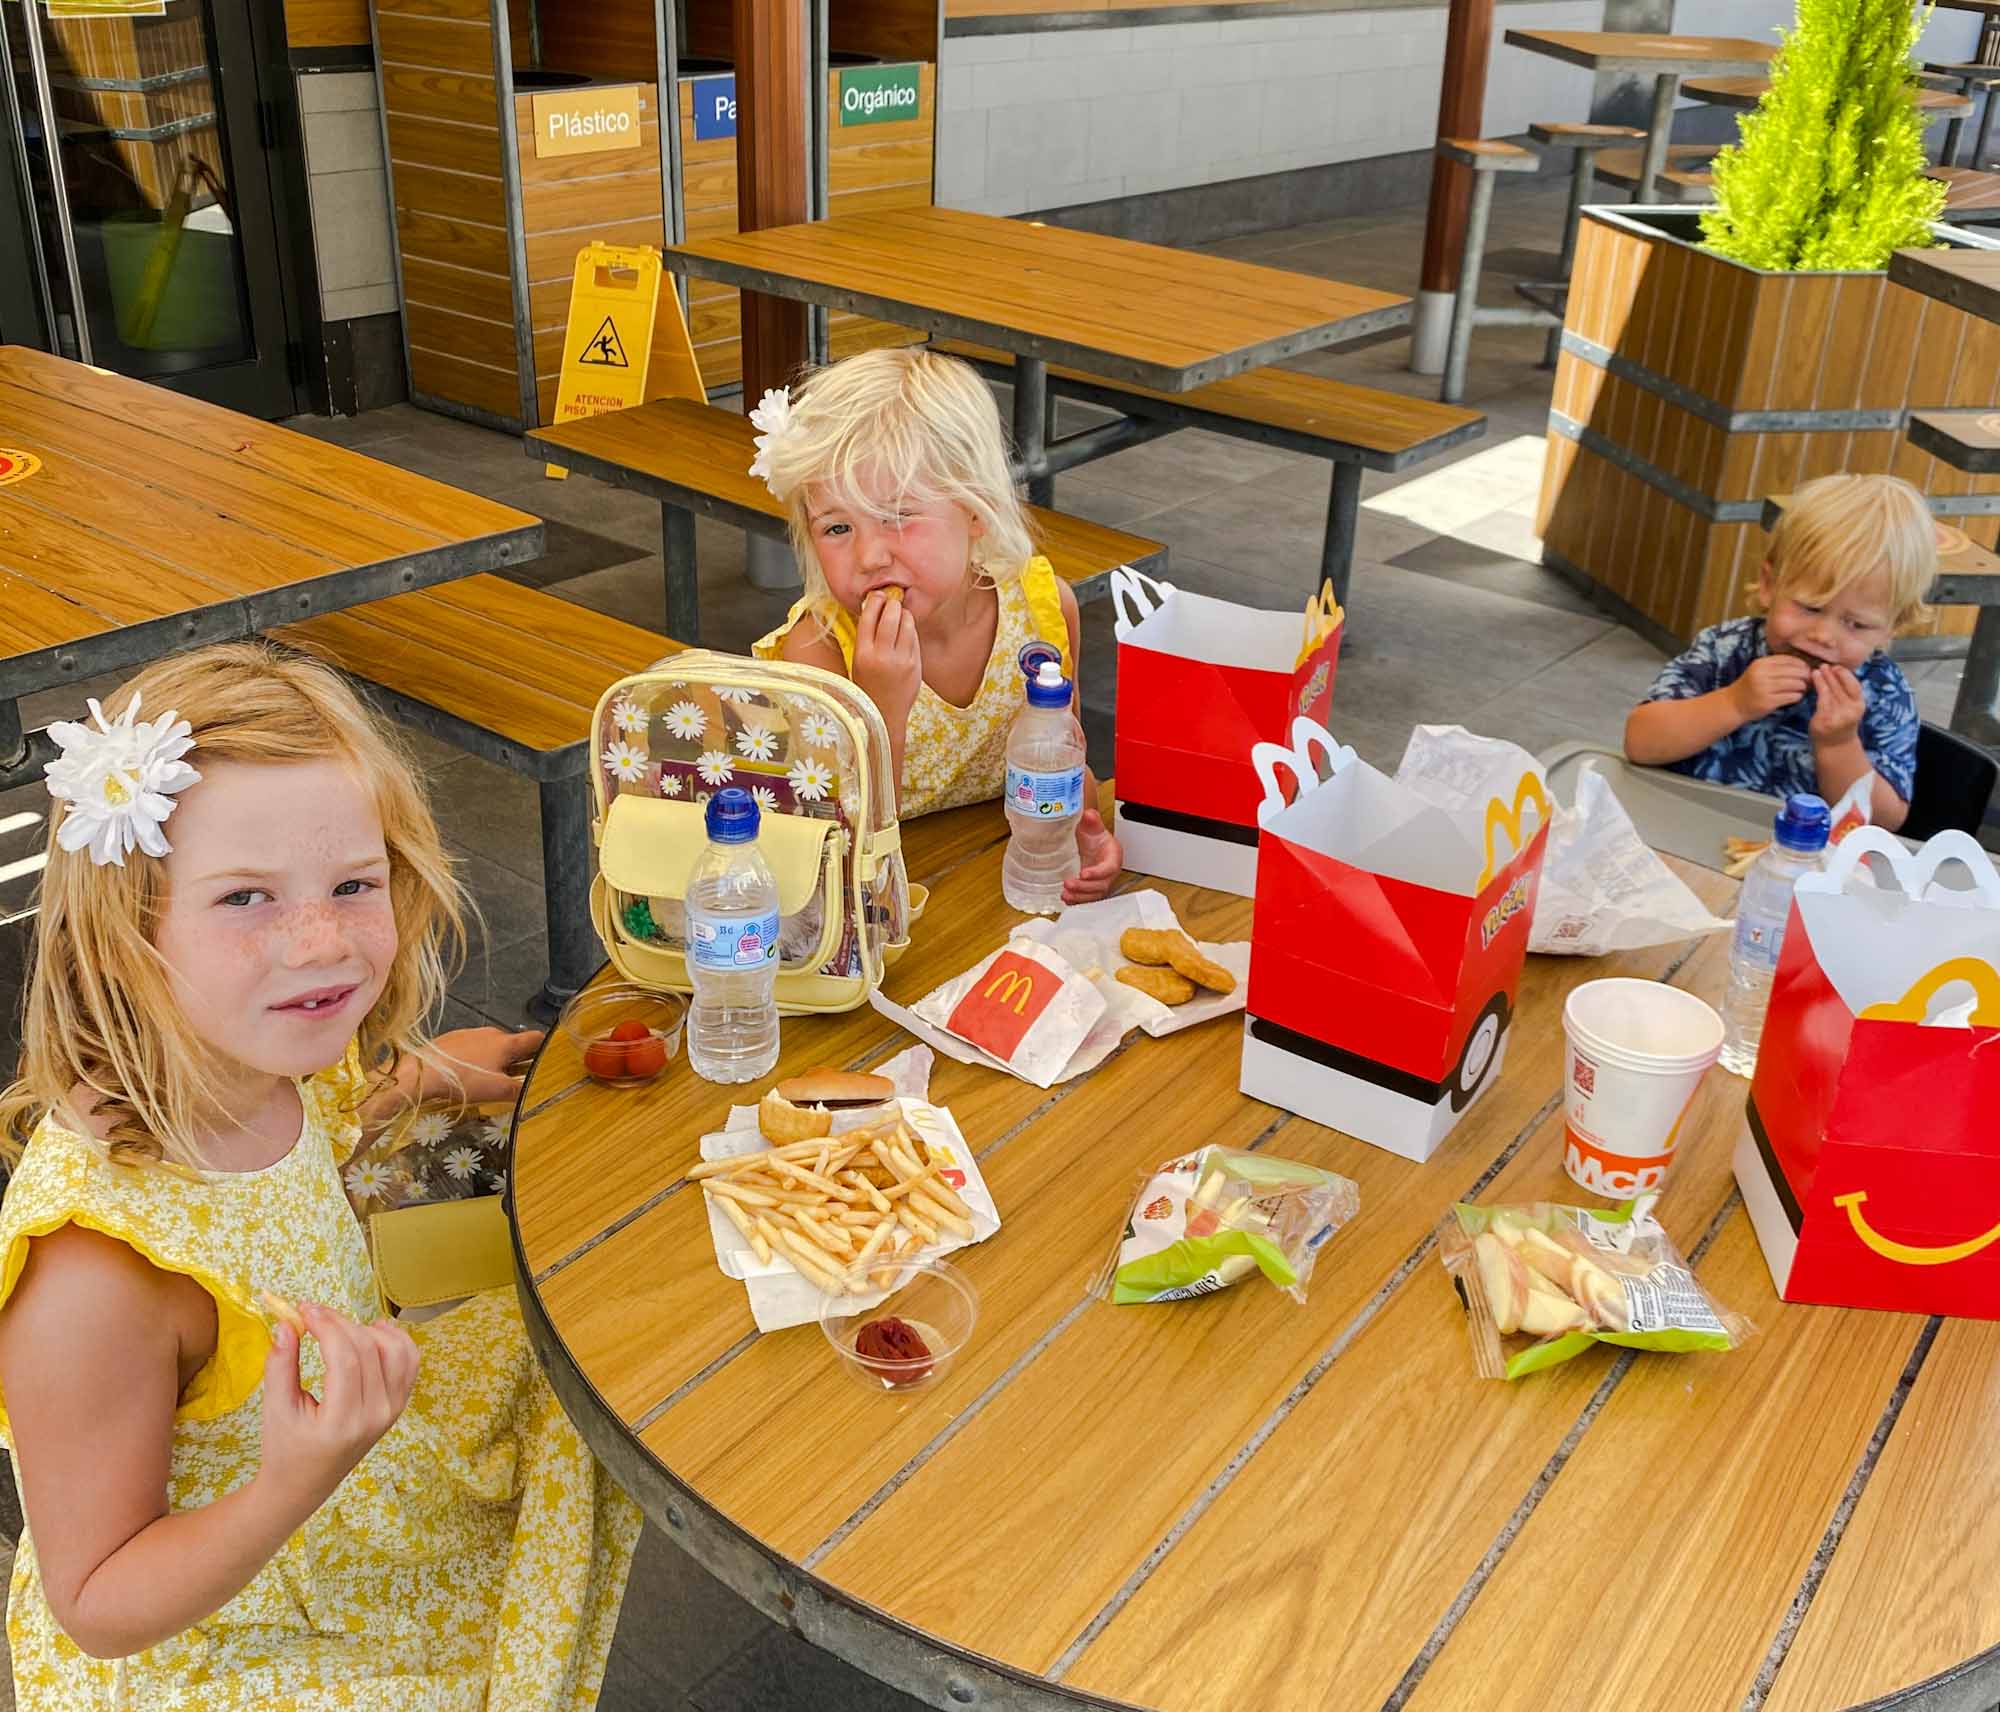 3 young children sat an outside table eating McDonald's food